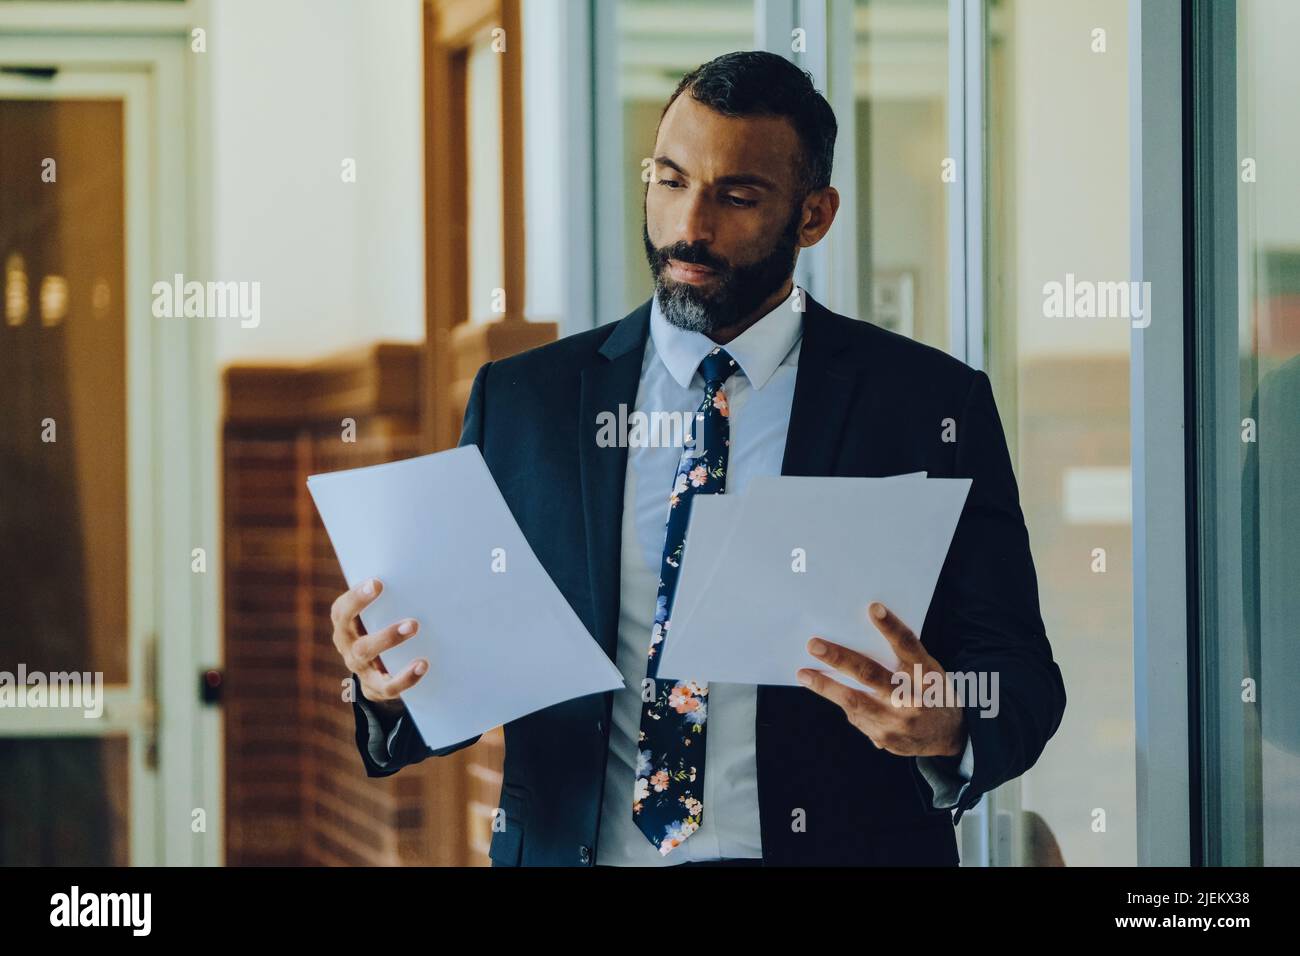 Mid adult bearded black man Entrepreneur Businessman wearing suit holding papers walking in office shot Stock Photo